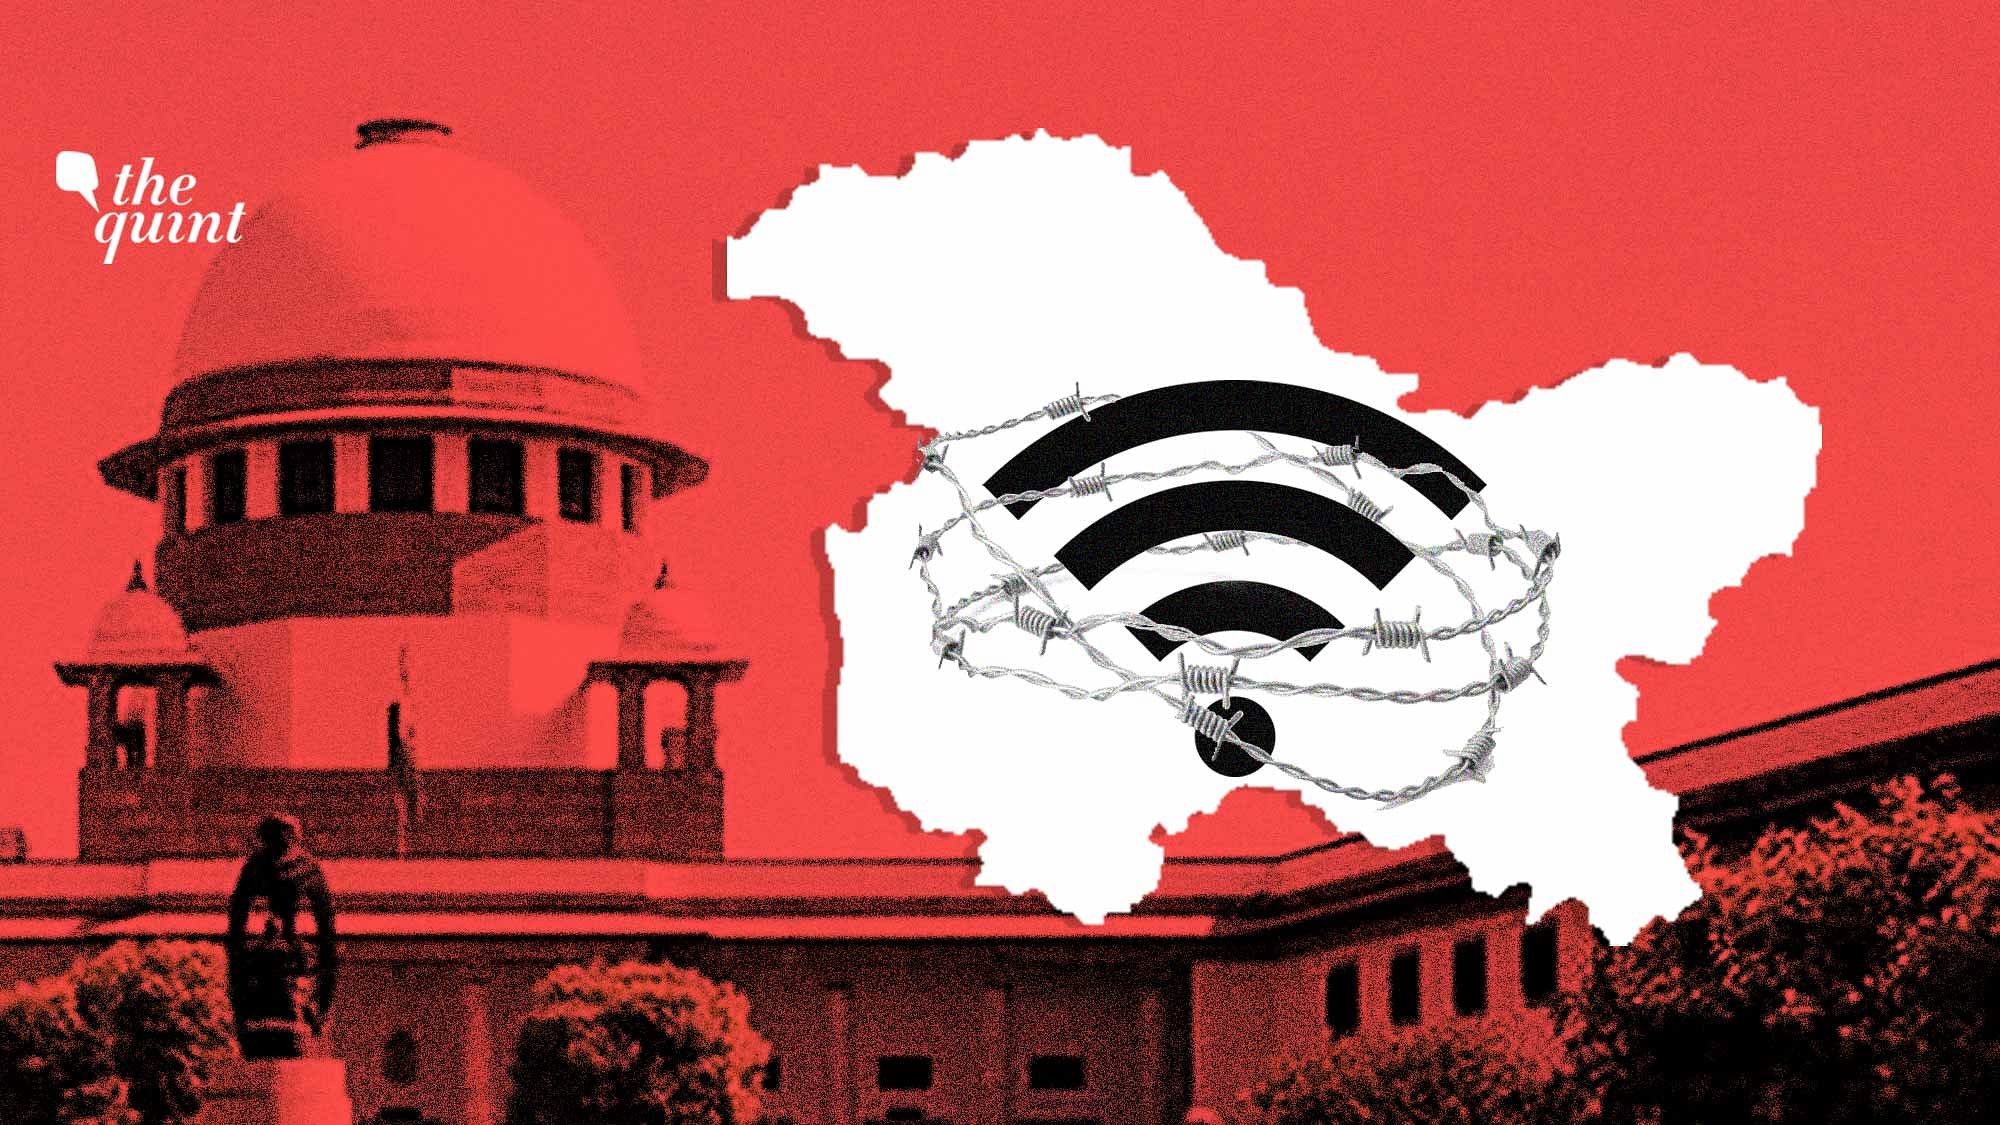 Internet services in Jammu &amp; Kashmir had been suspended since 5 August 2019 and 2G services were restored in January 2020.&nbsp;